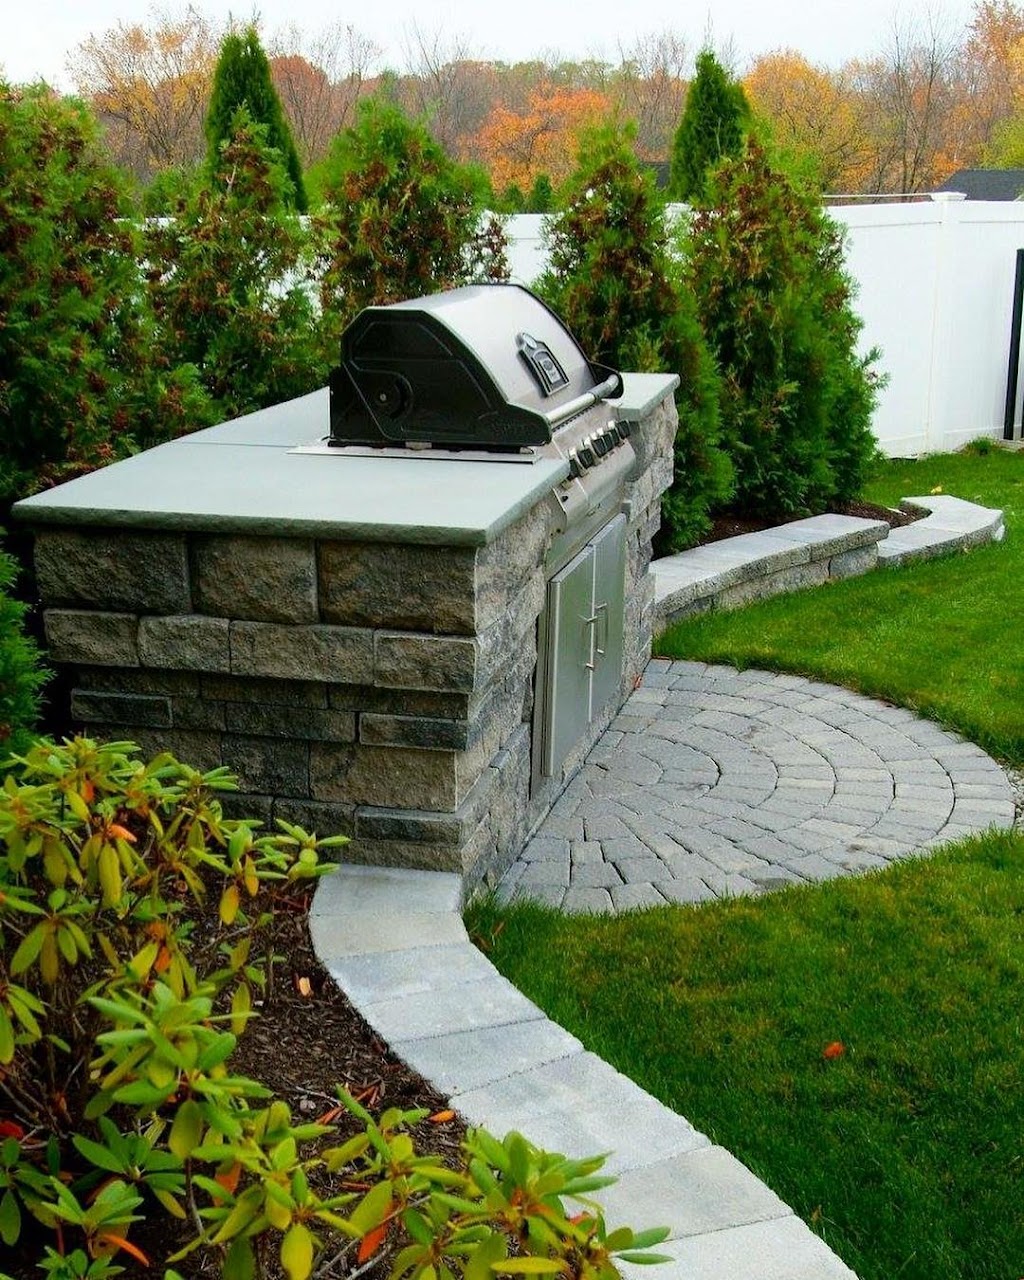 Landscape Incorporated | 239B Old Maxwell Rd, Latham, NY 12110, USA | Phone: (518) 489-2341